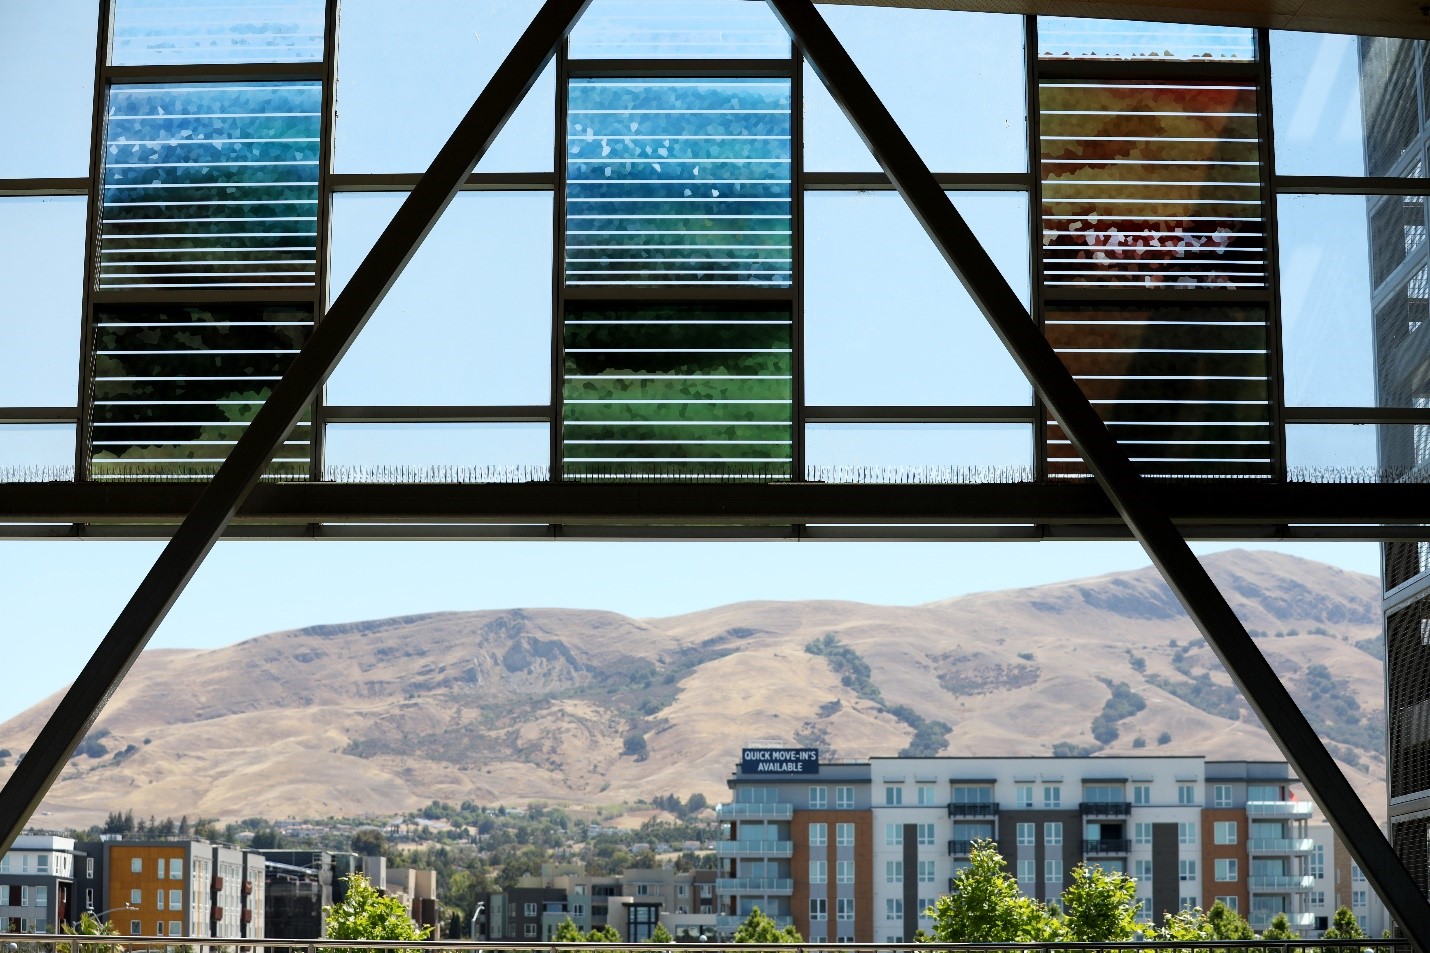  Art installation at Warm Springs/Fremont Station captures beauty of station’s surroundings 